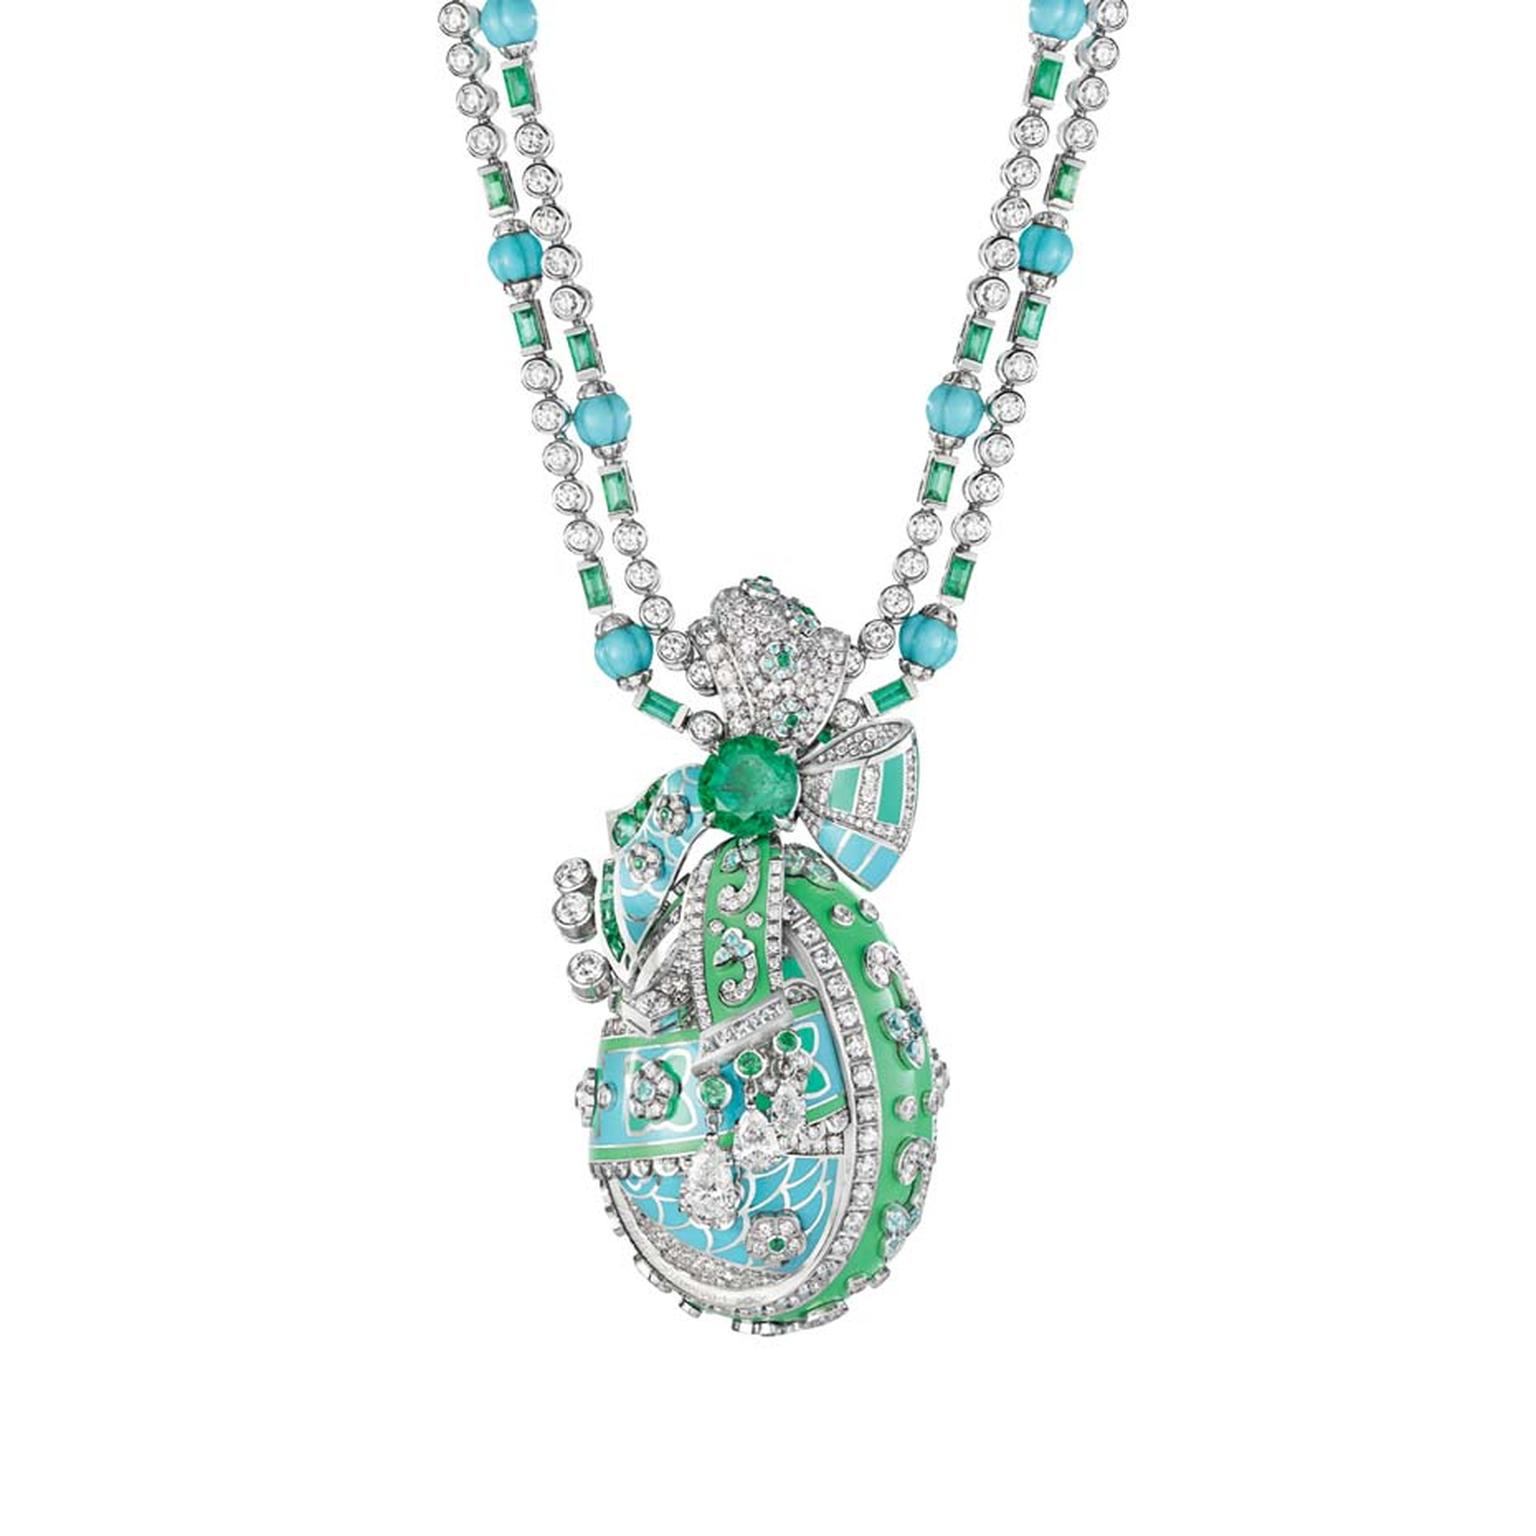 Fabergé necklace from the Summer in Provence high jewelry collection, set with emeralds, turquoise beads and diamonds, holding a detachable Fabergé egg embellished with floral motifs.